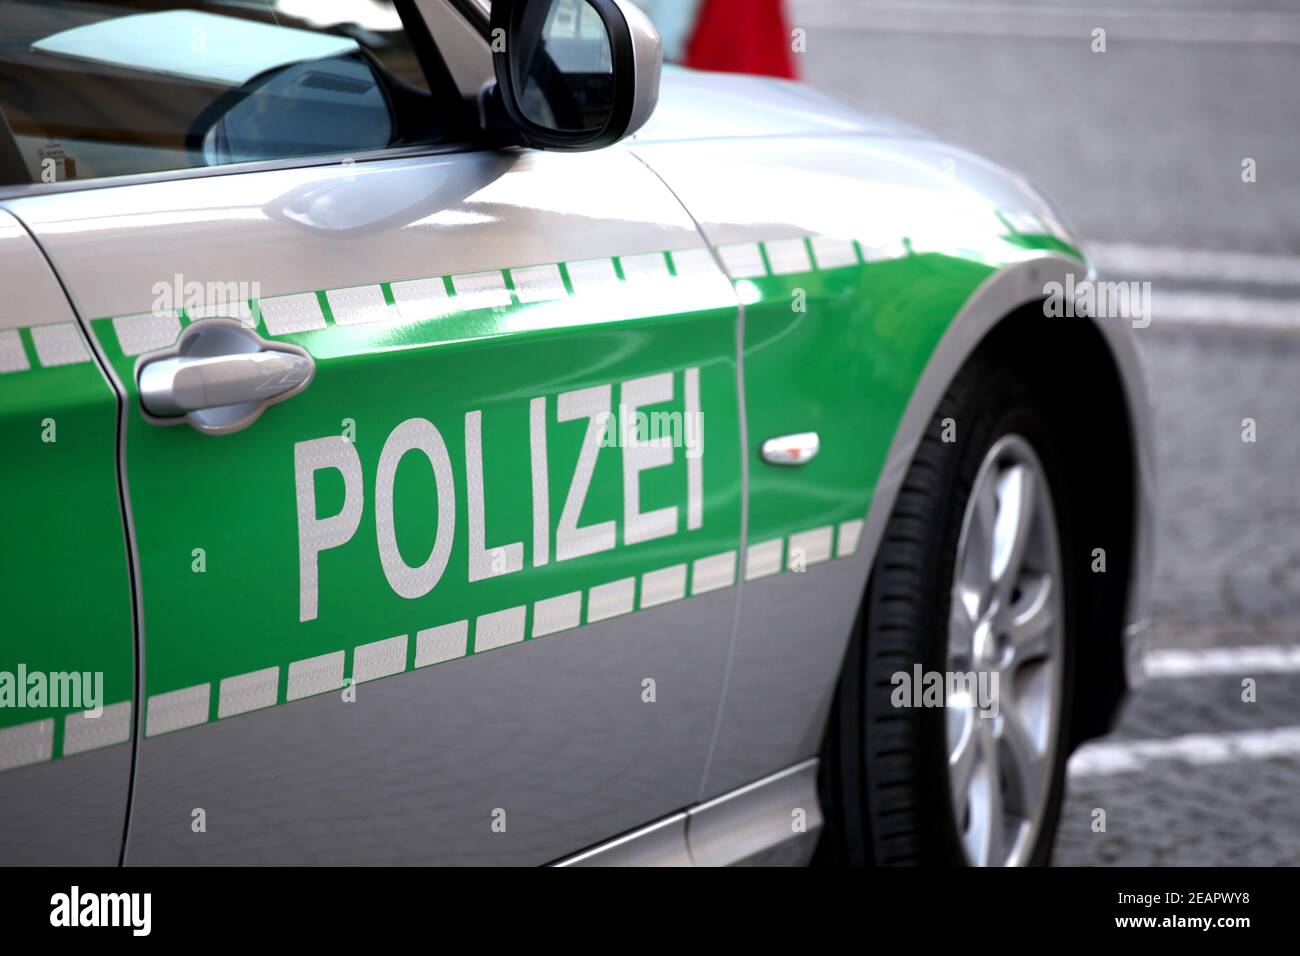 Silver police patrol car with green sticker Stock Photo